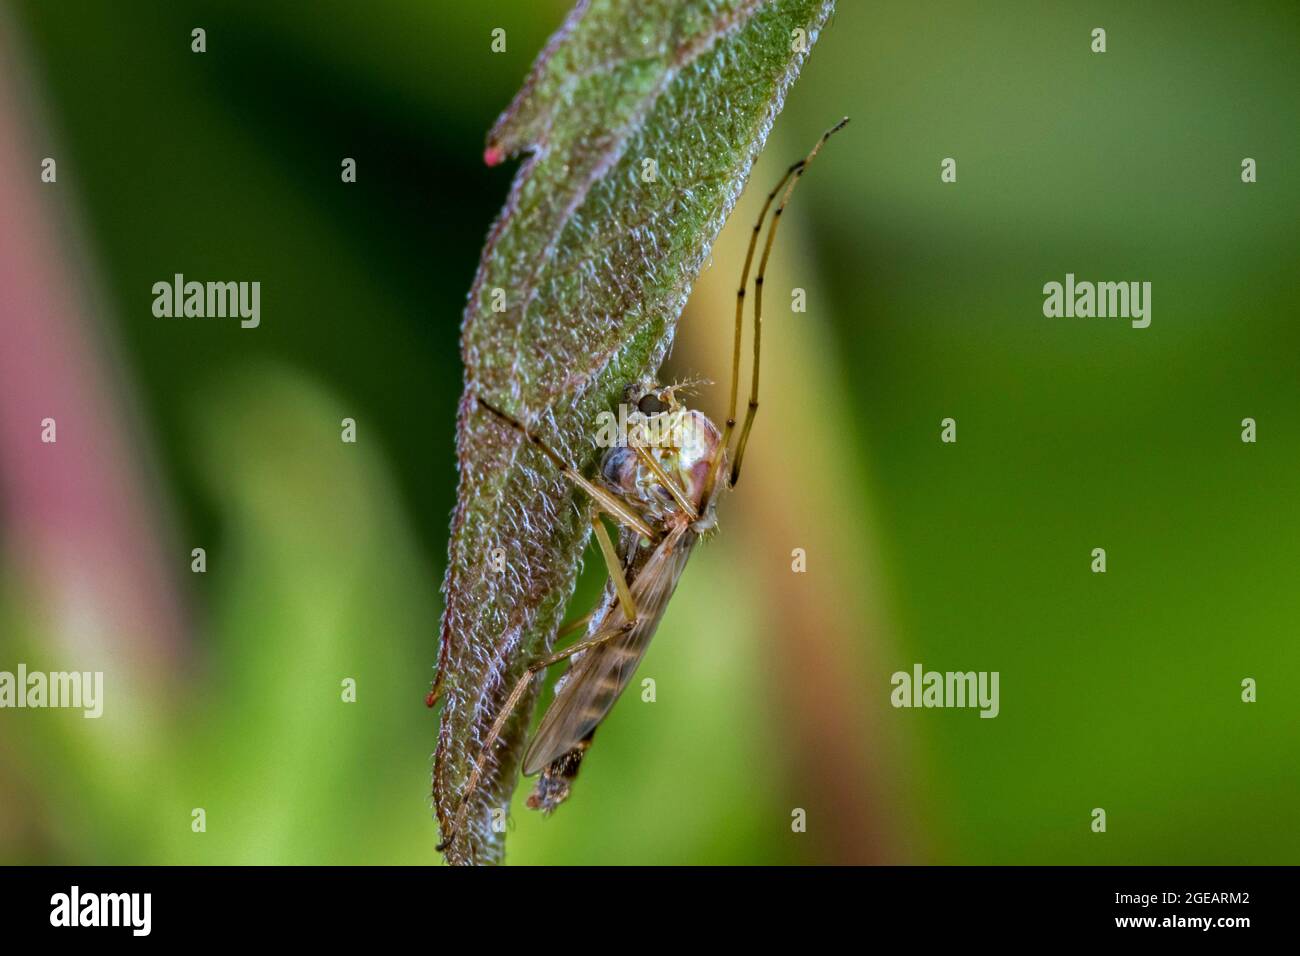 Hironomid / nonbiting midge / lake fly (Chironomus spec.) on leaf in summer Stock Photo